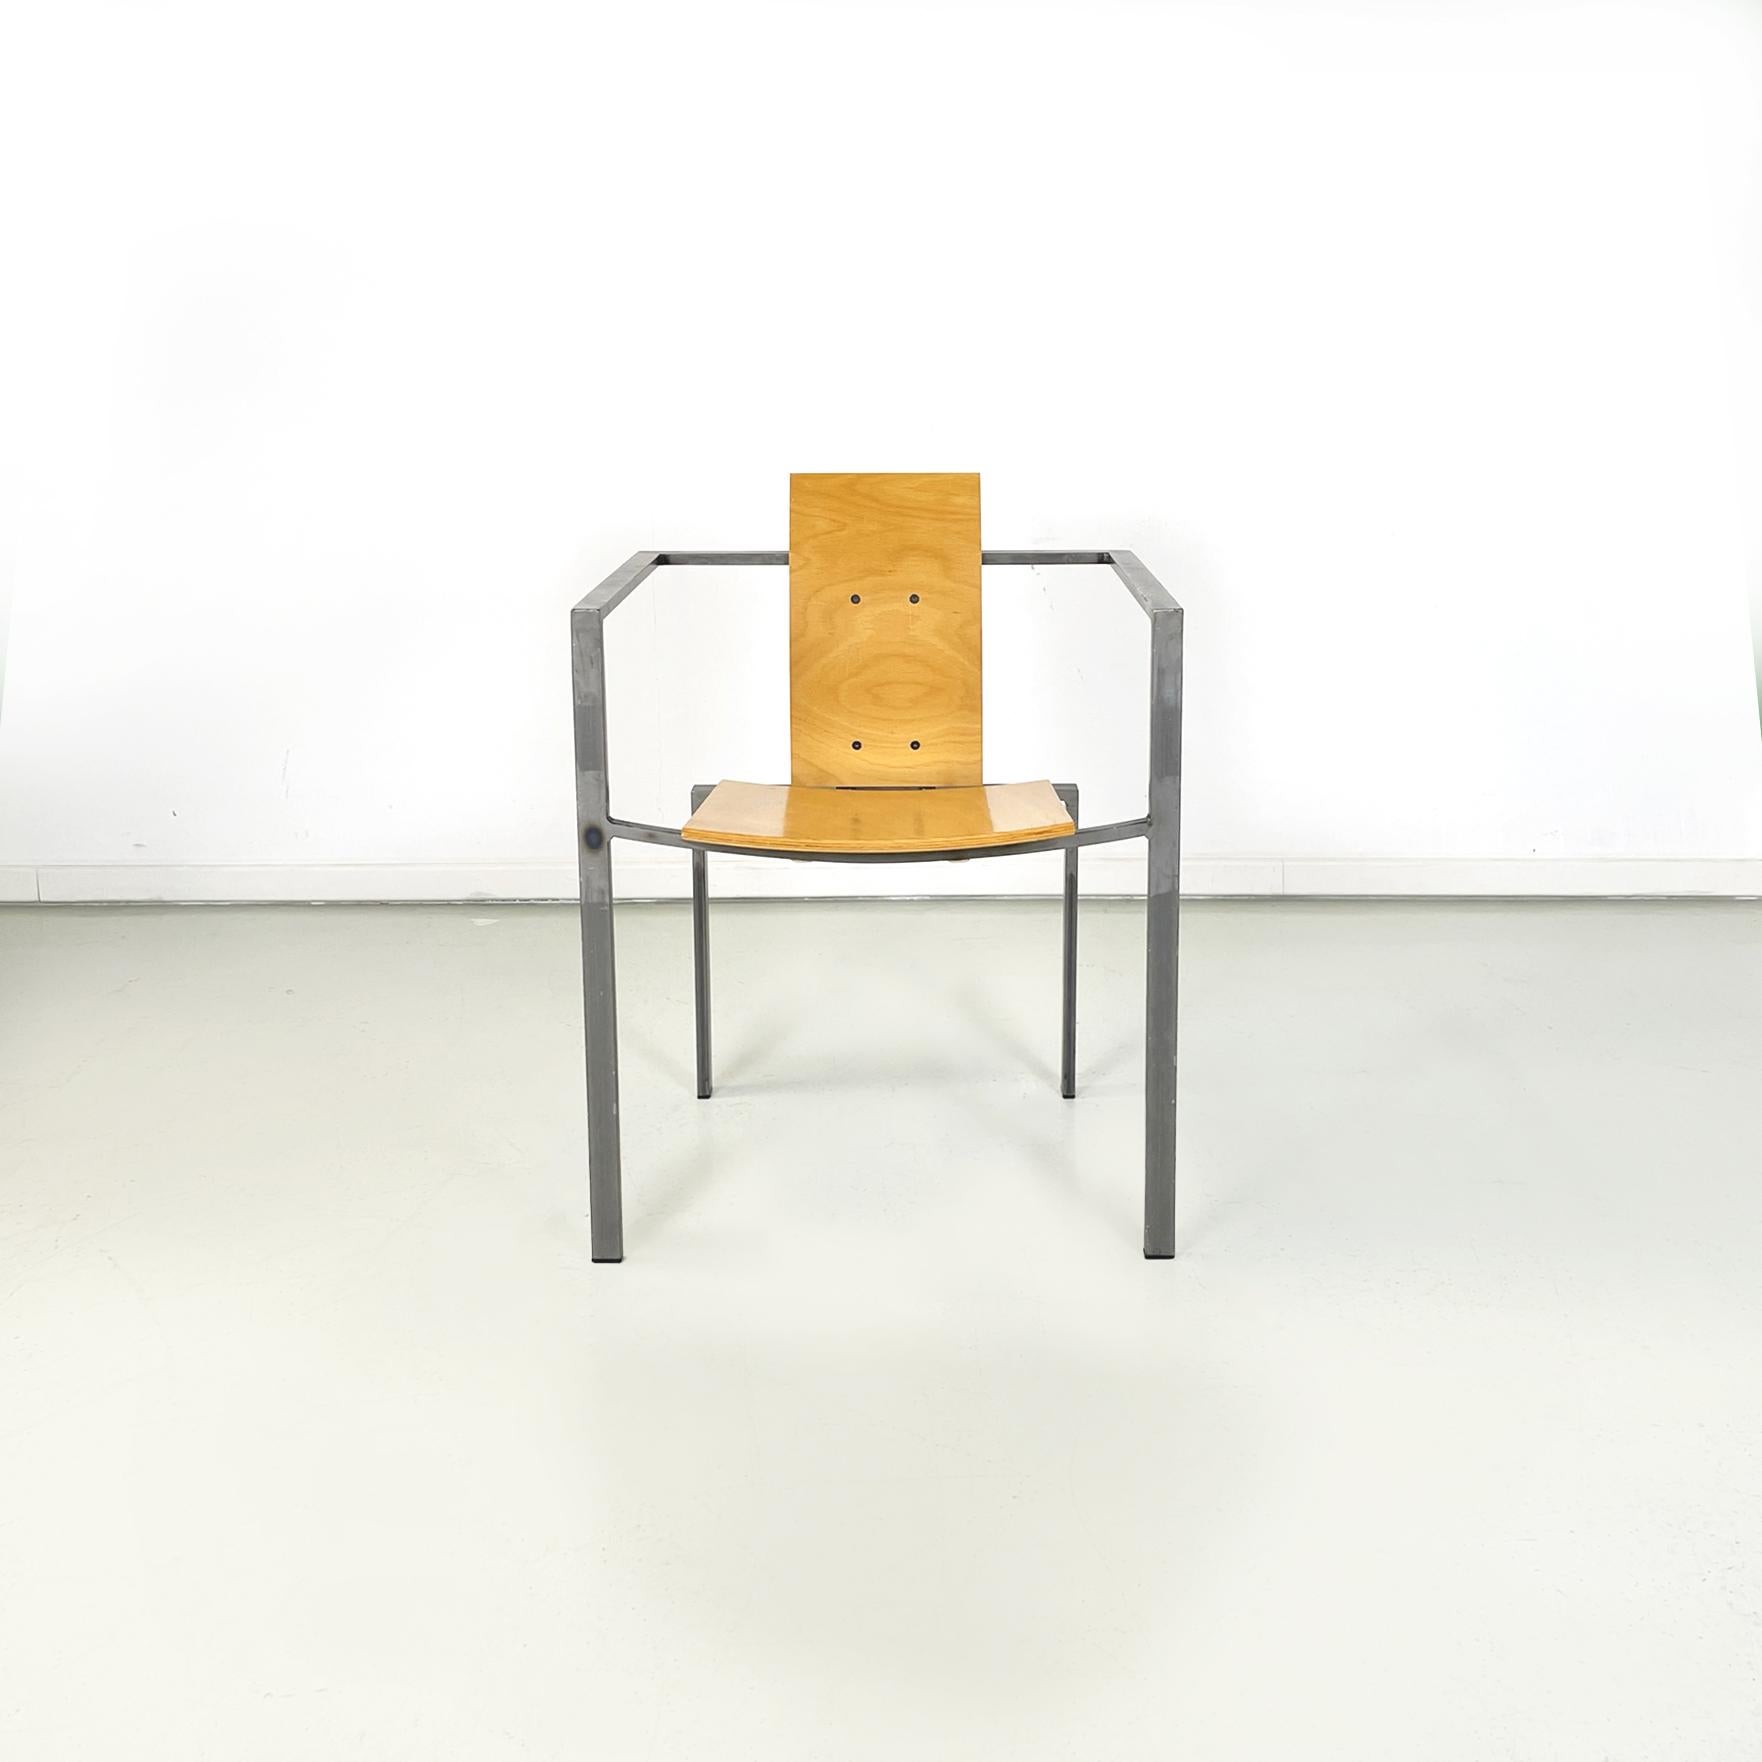 German modern Squared chair in wood and metal by Karl-Friedrich Foster KKF, 1980s
Dining chair with squared seat and back in curved light wood. The square section structure is in metal. Armrest present.
Produced and designed by Karl-Friedrich